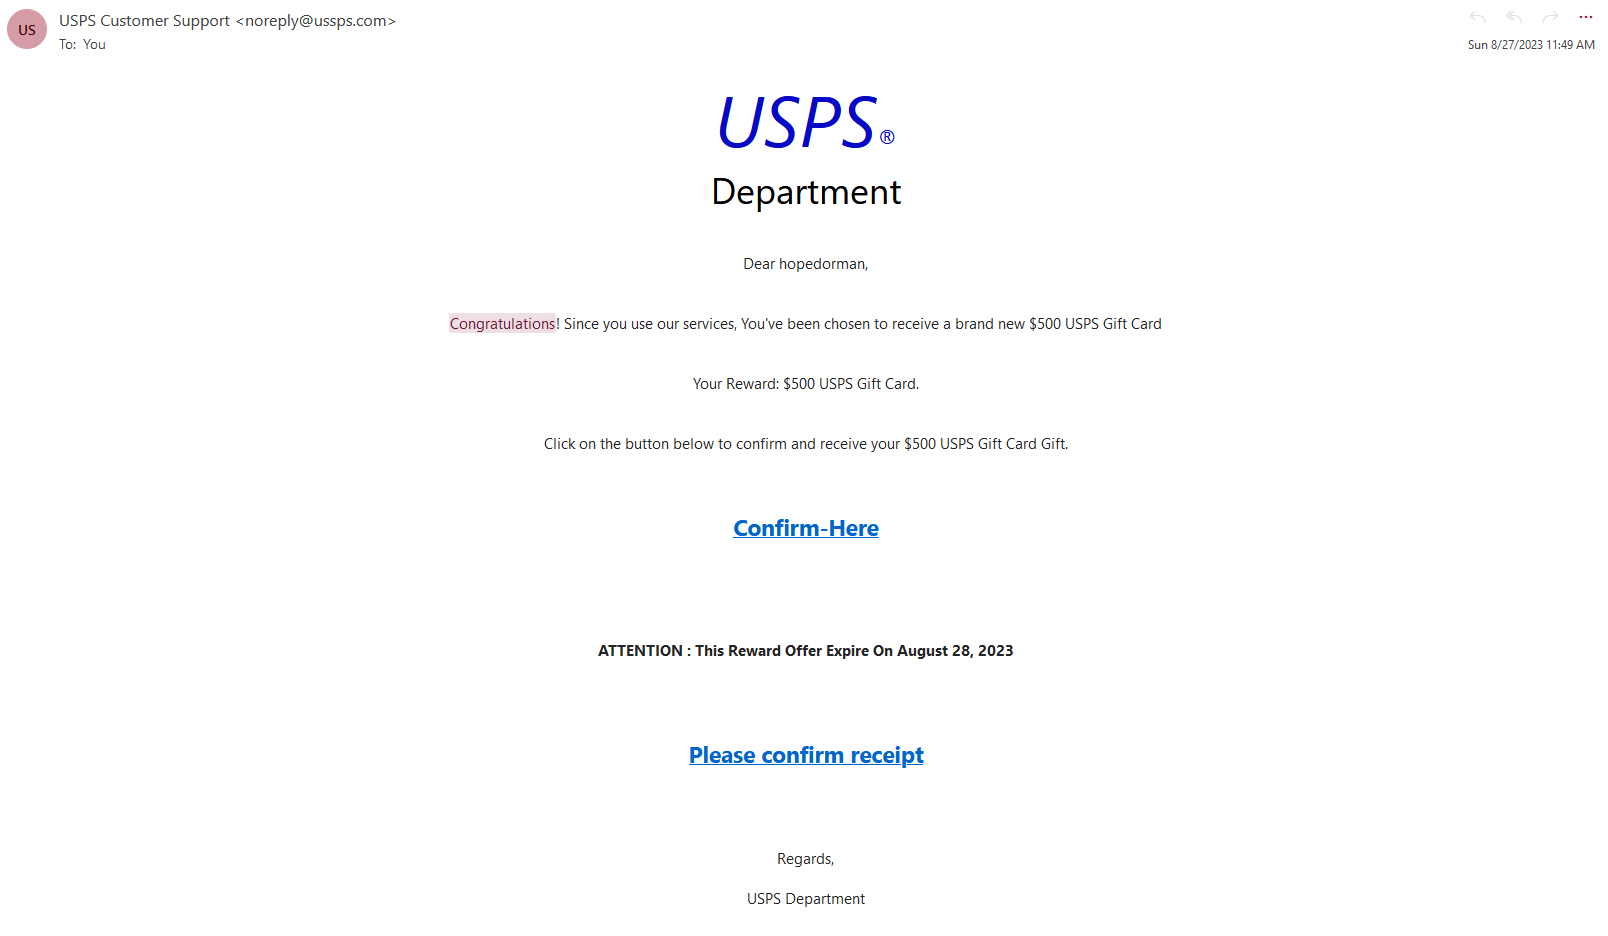 Phishing email pretending to be a prize notification email from the United States Postal Service